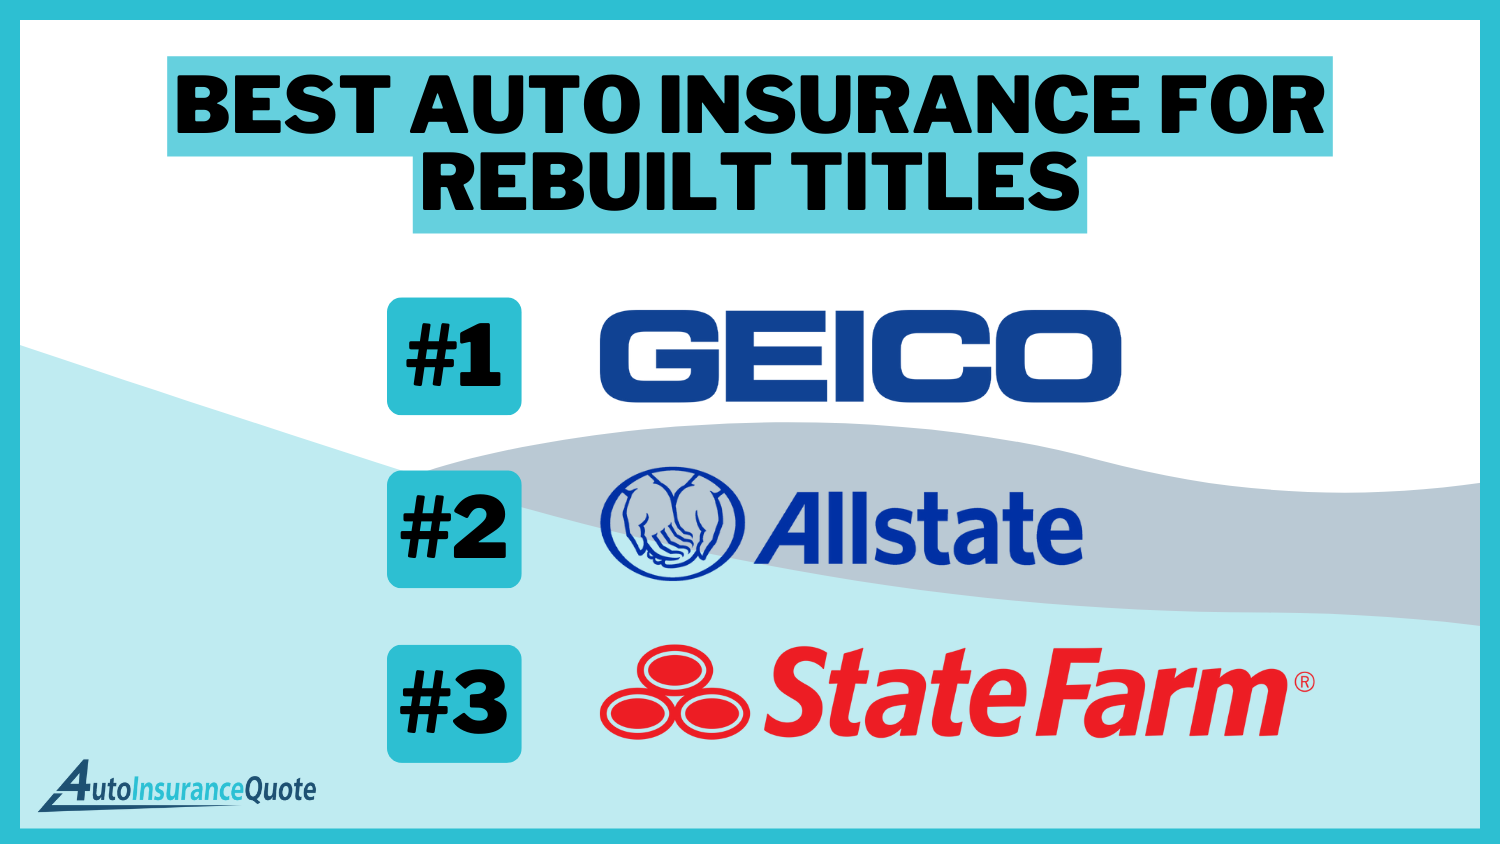 Geico, Allstate, and State Farm: Best Auto Insurance for Rebuilt Titles